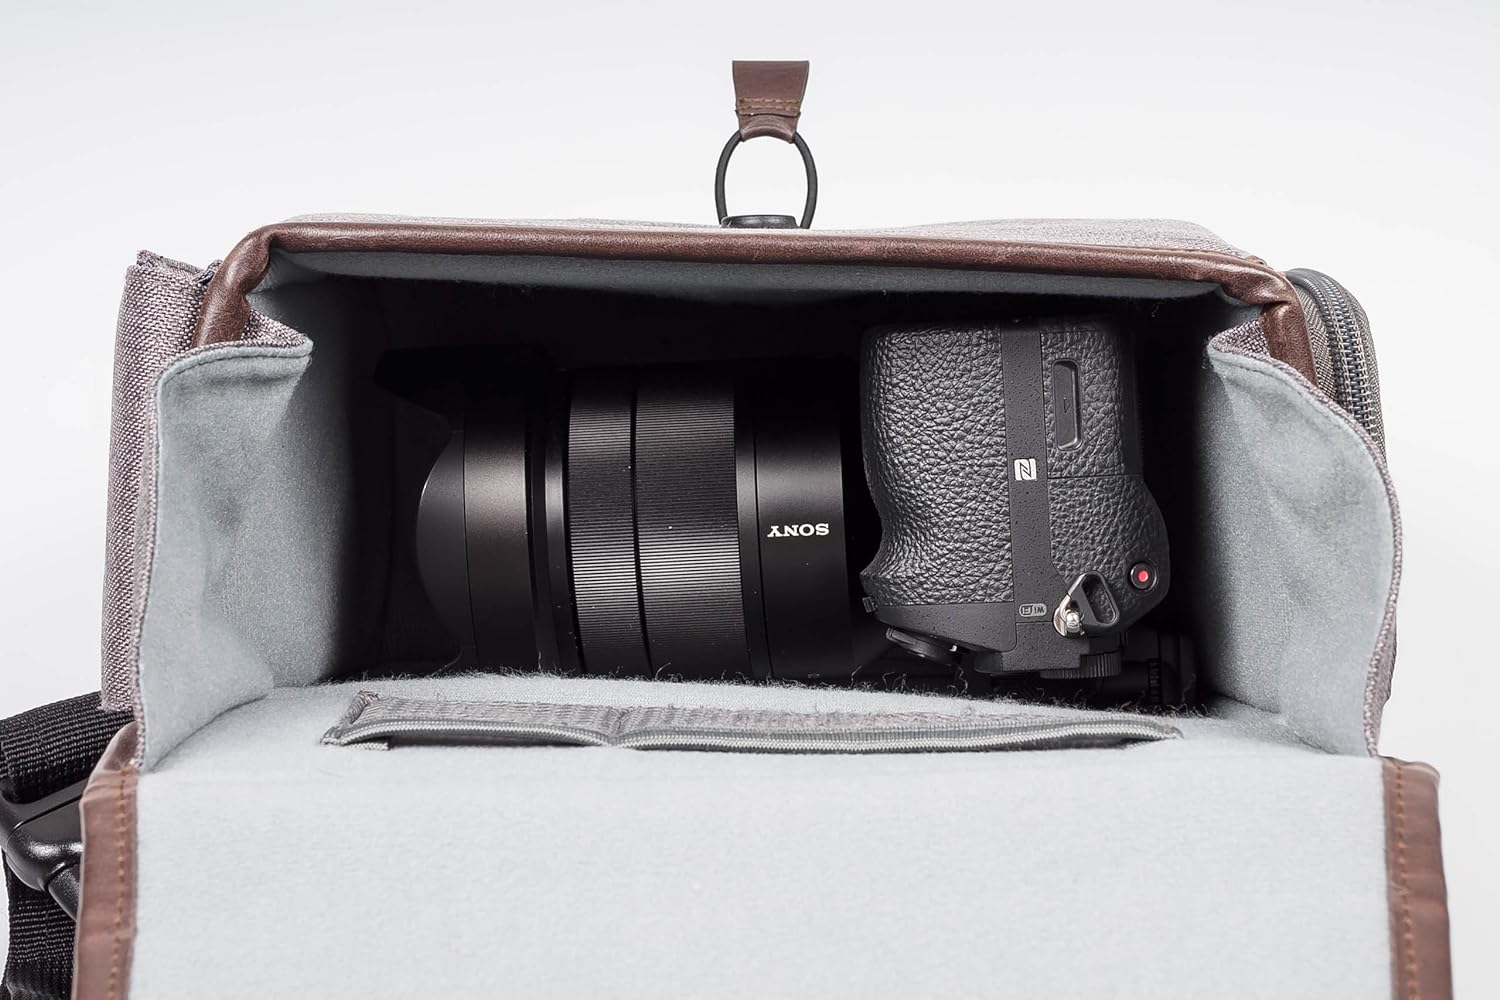 CAMSLINGER Streetomatic+ camera bag for mirrorless cameras, DSLRs and Superzooms (two colours)